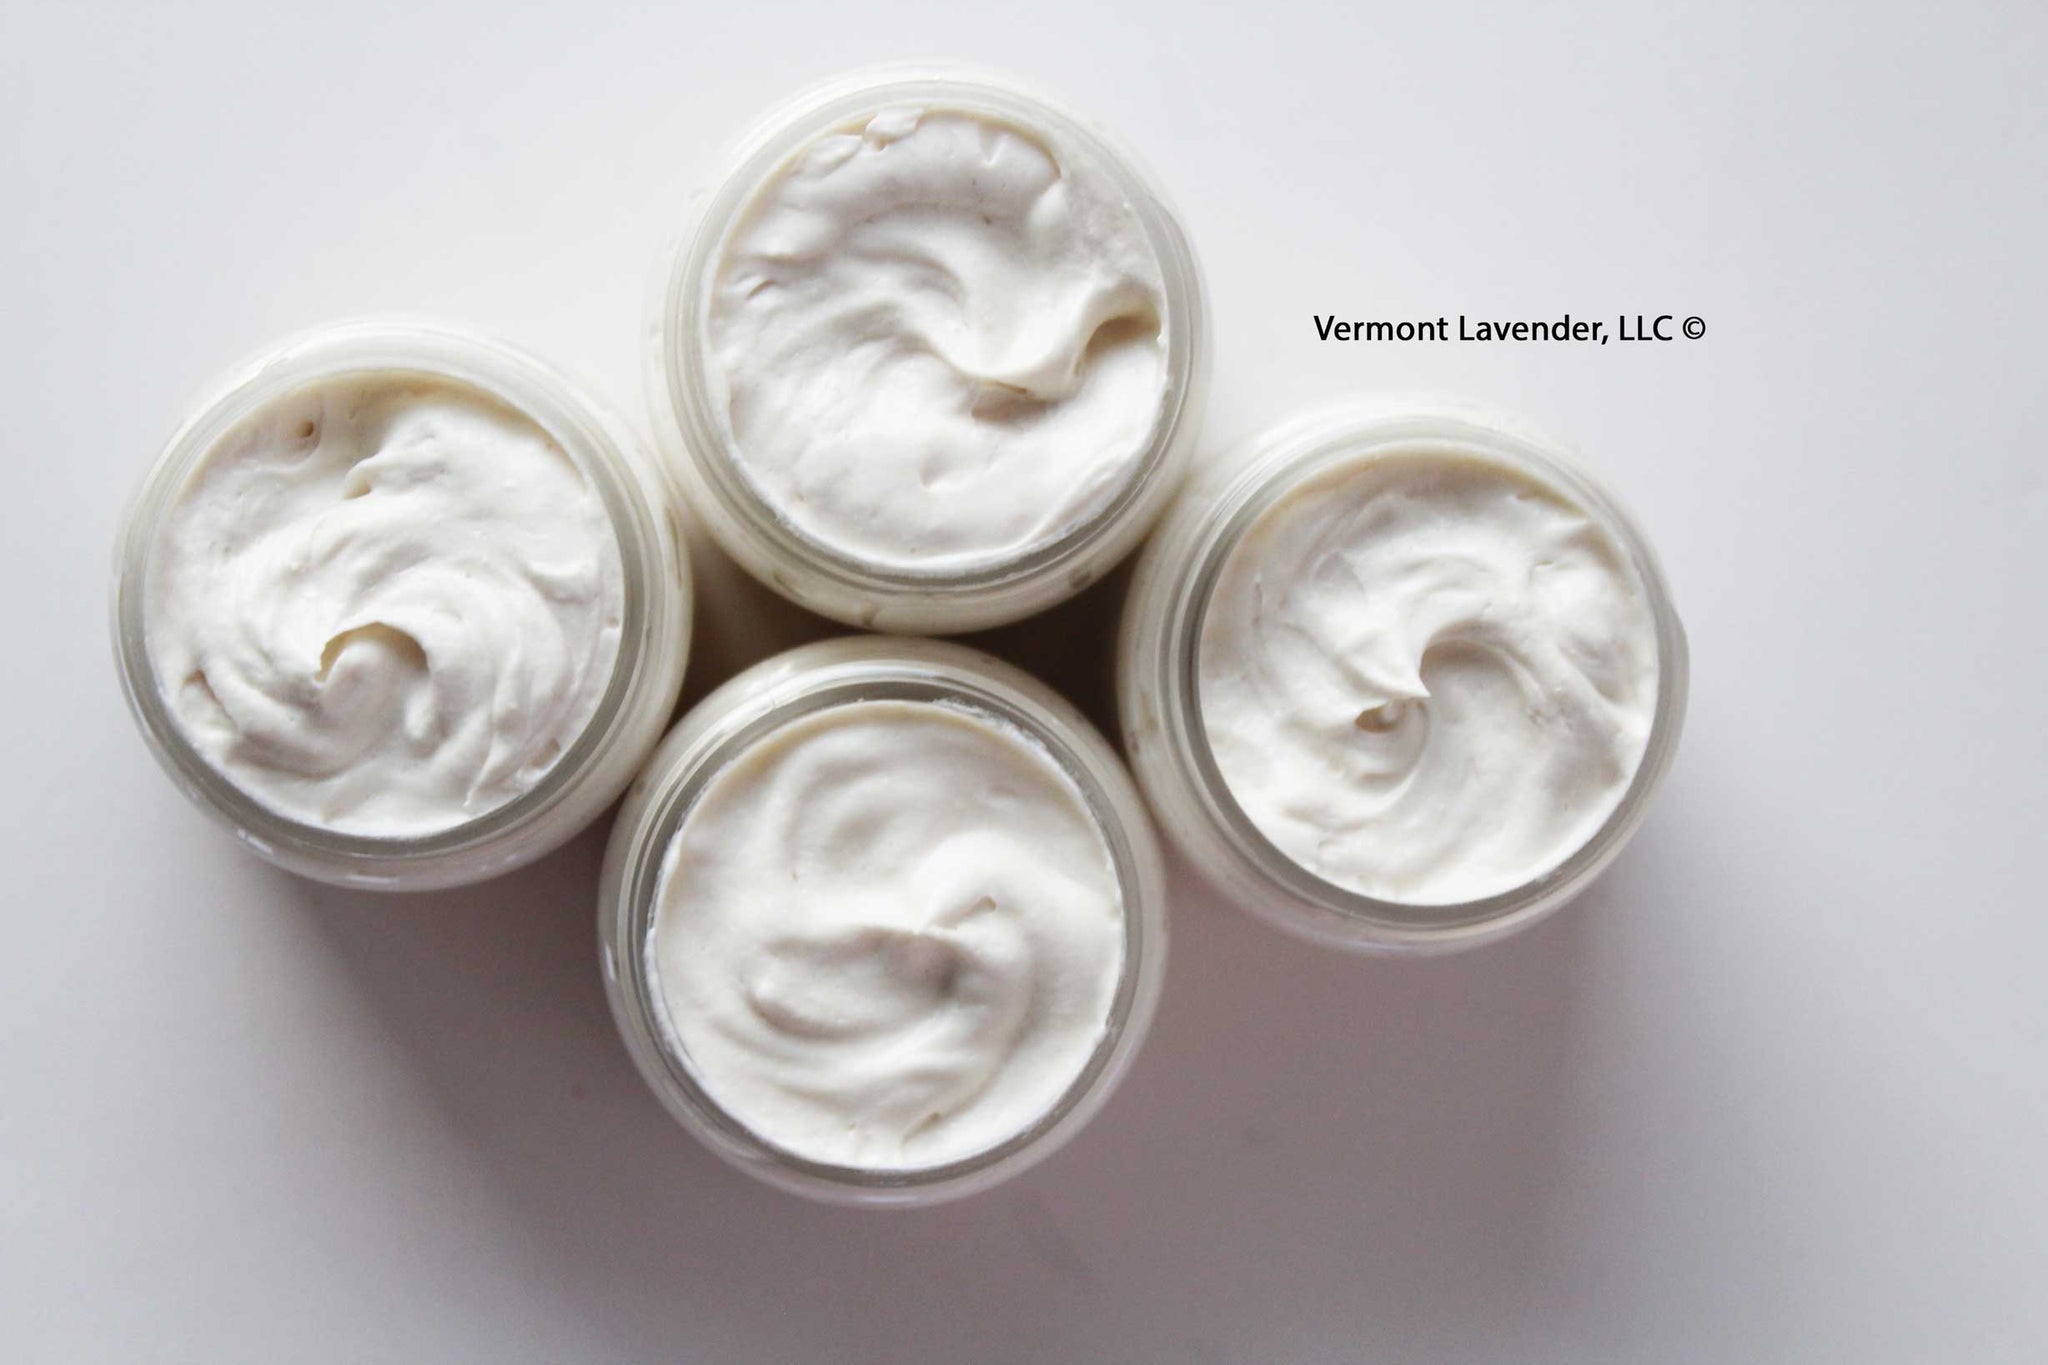 Whipped body butter that comes in unscented, peppermint, coffee and lavender.